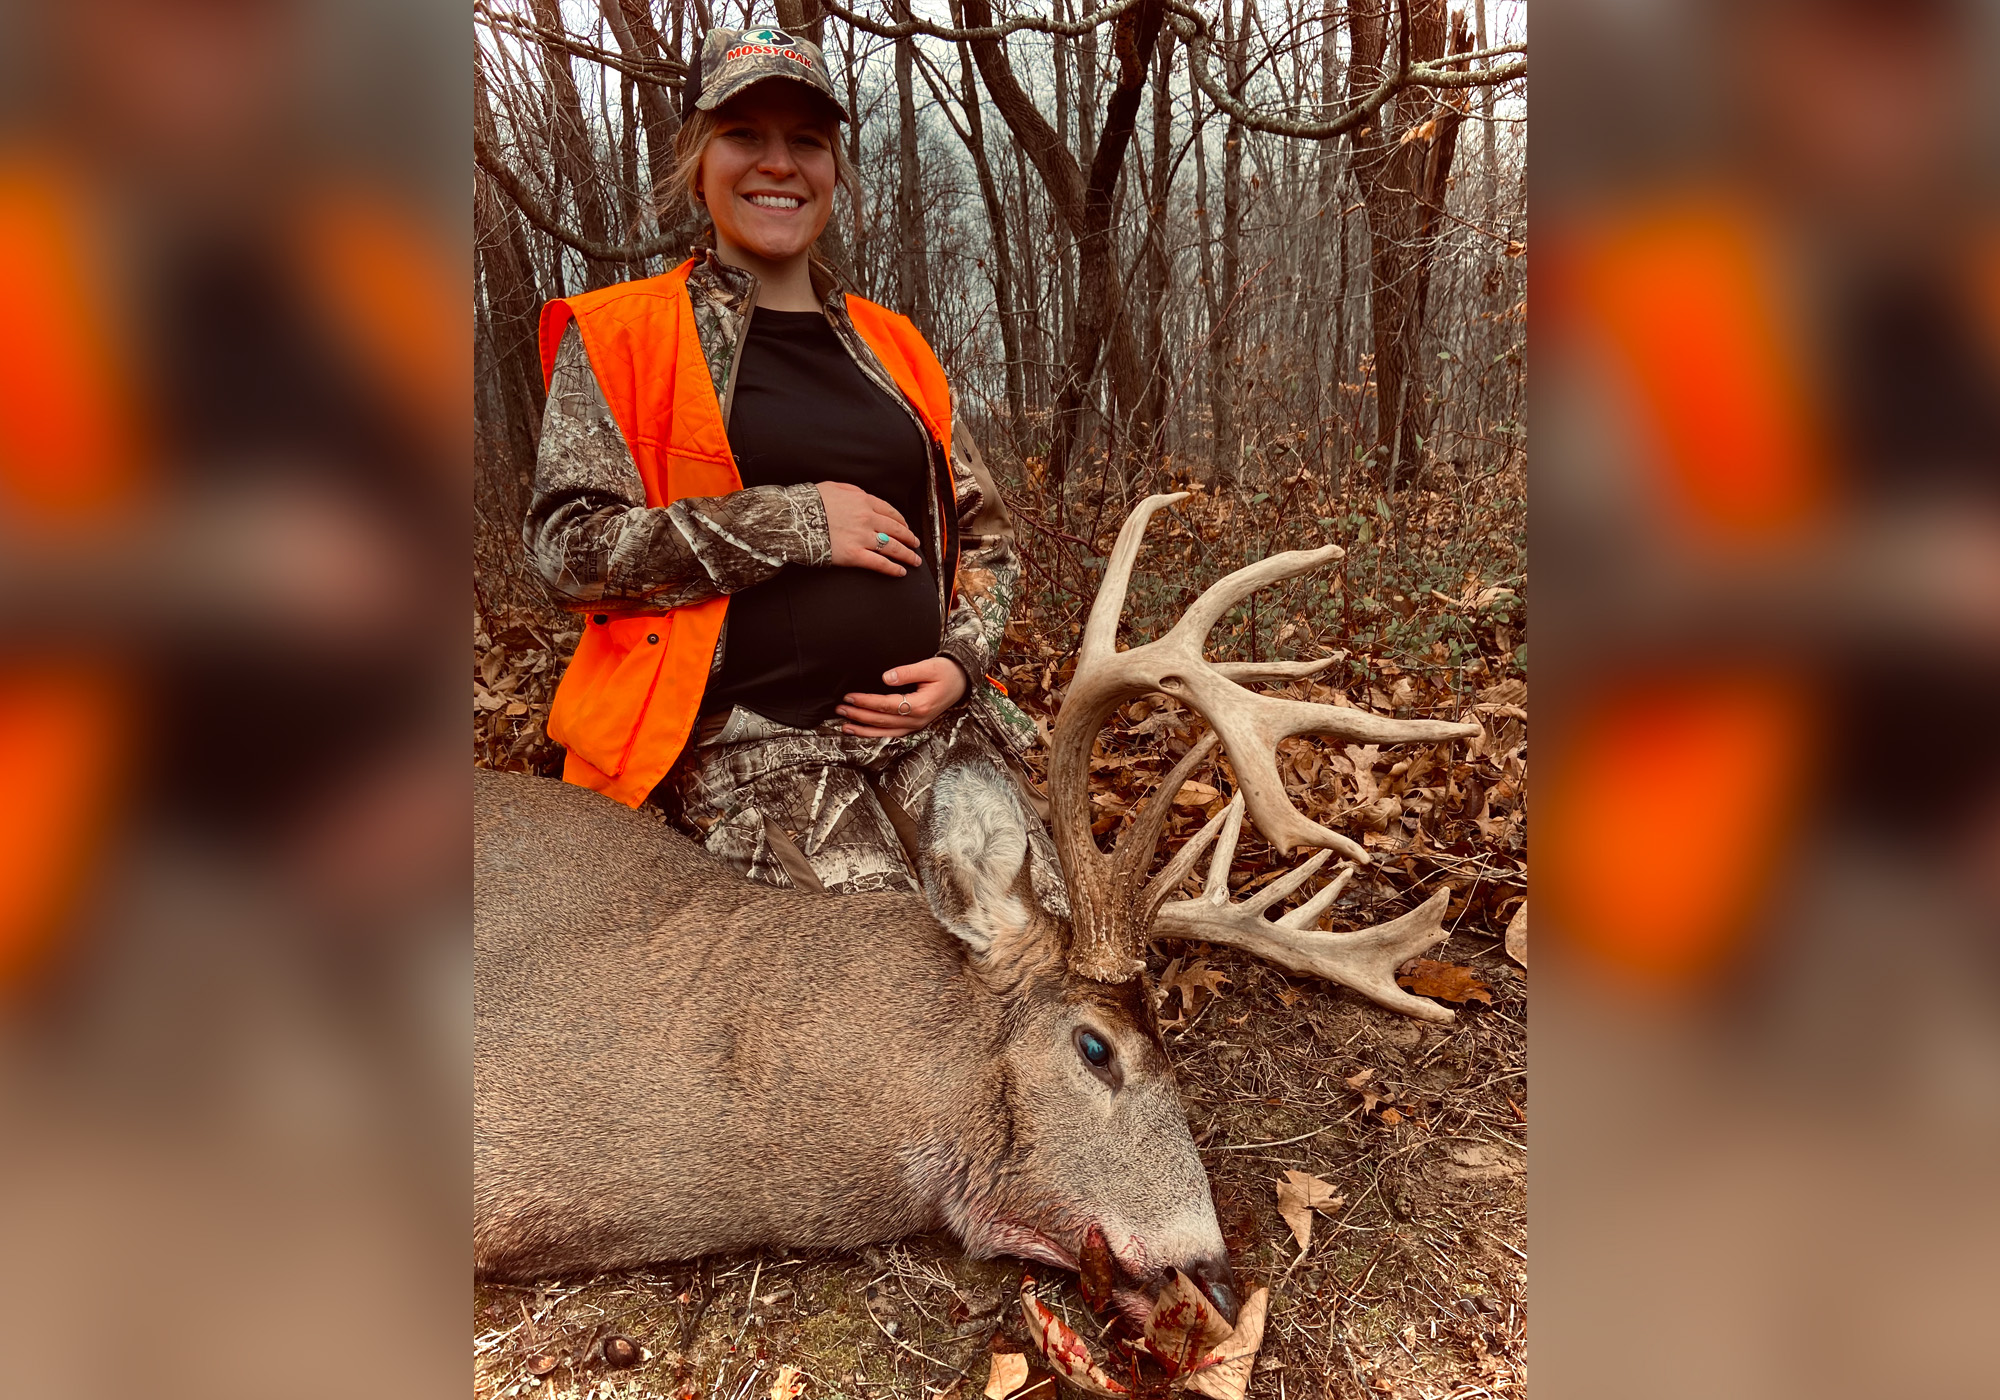 Two Years After Surviving a Treestand Fall, Ohio Hunter Tags 182-Inch Whitetail While Pregnant